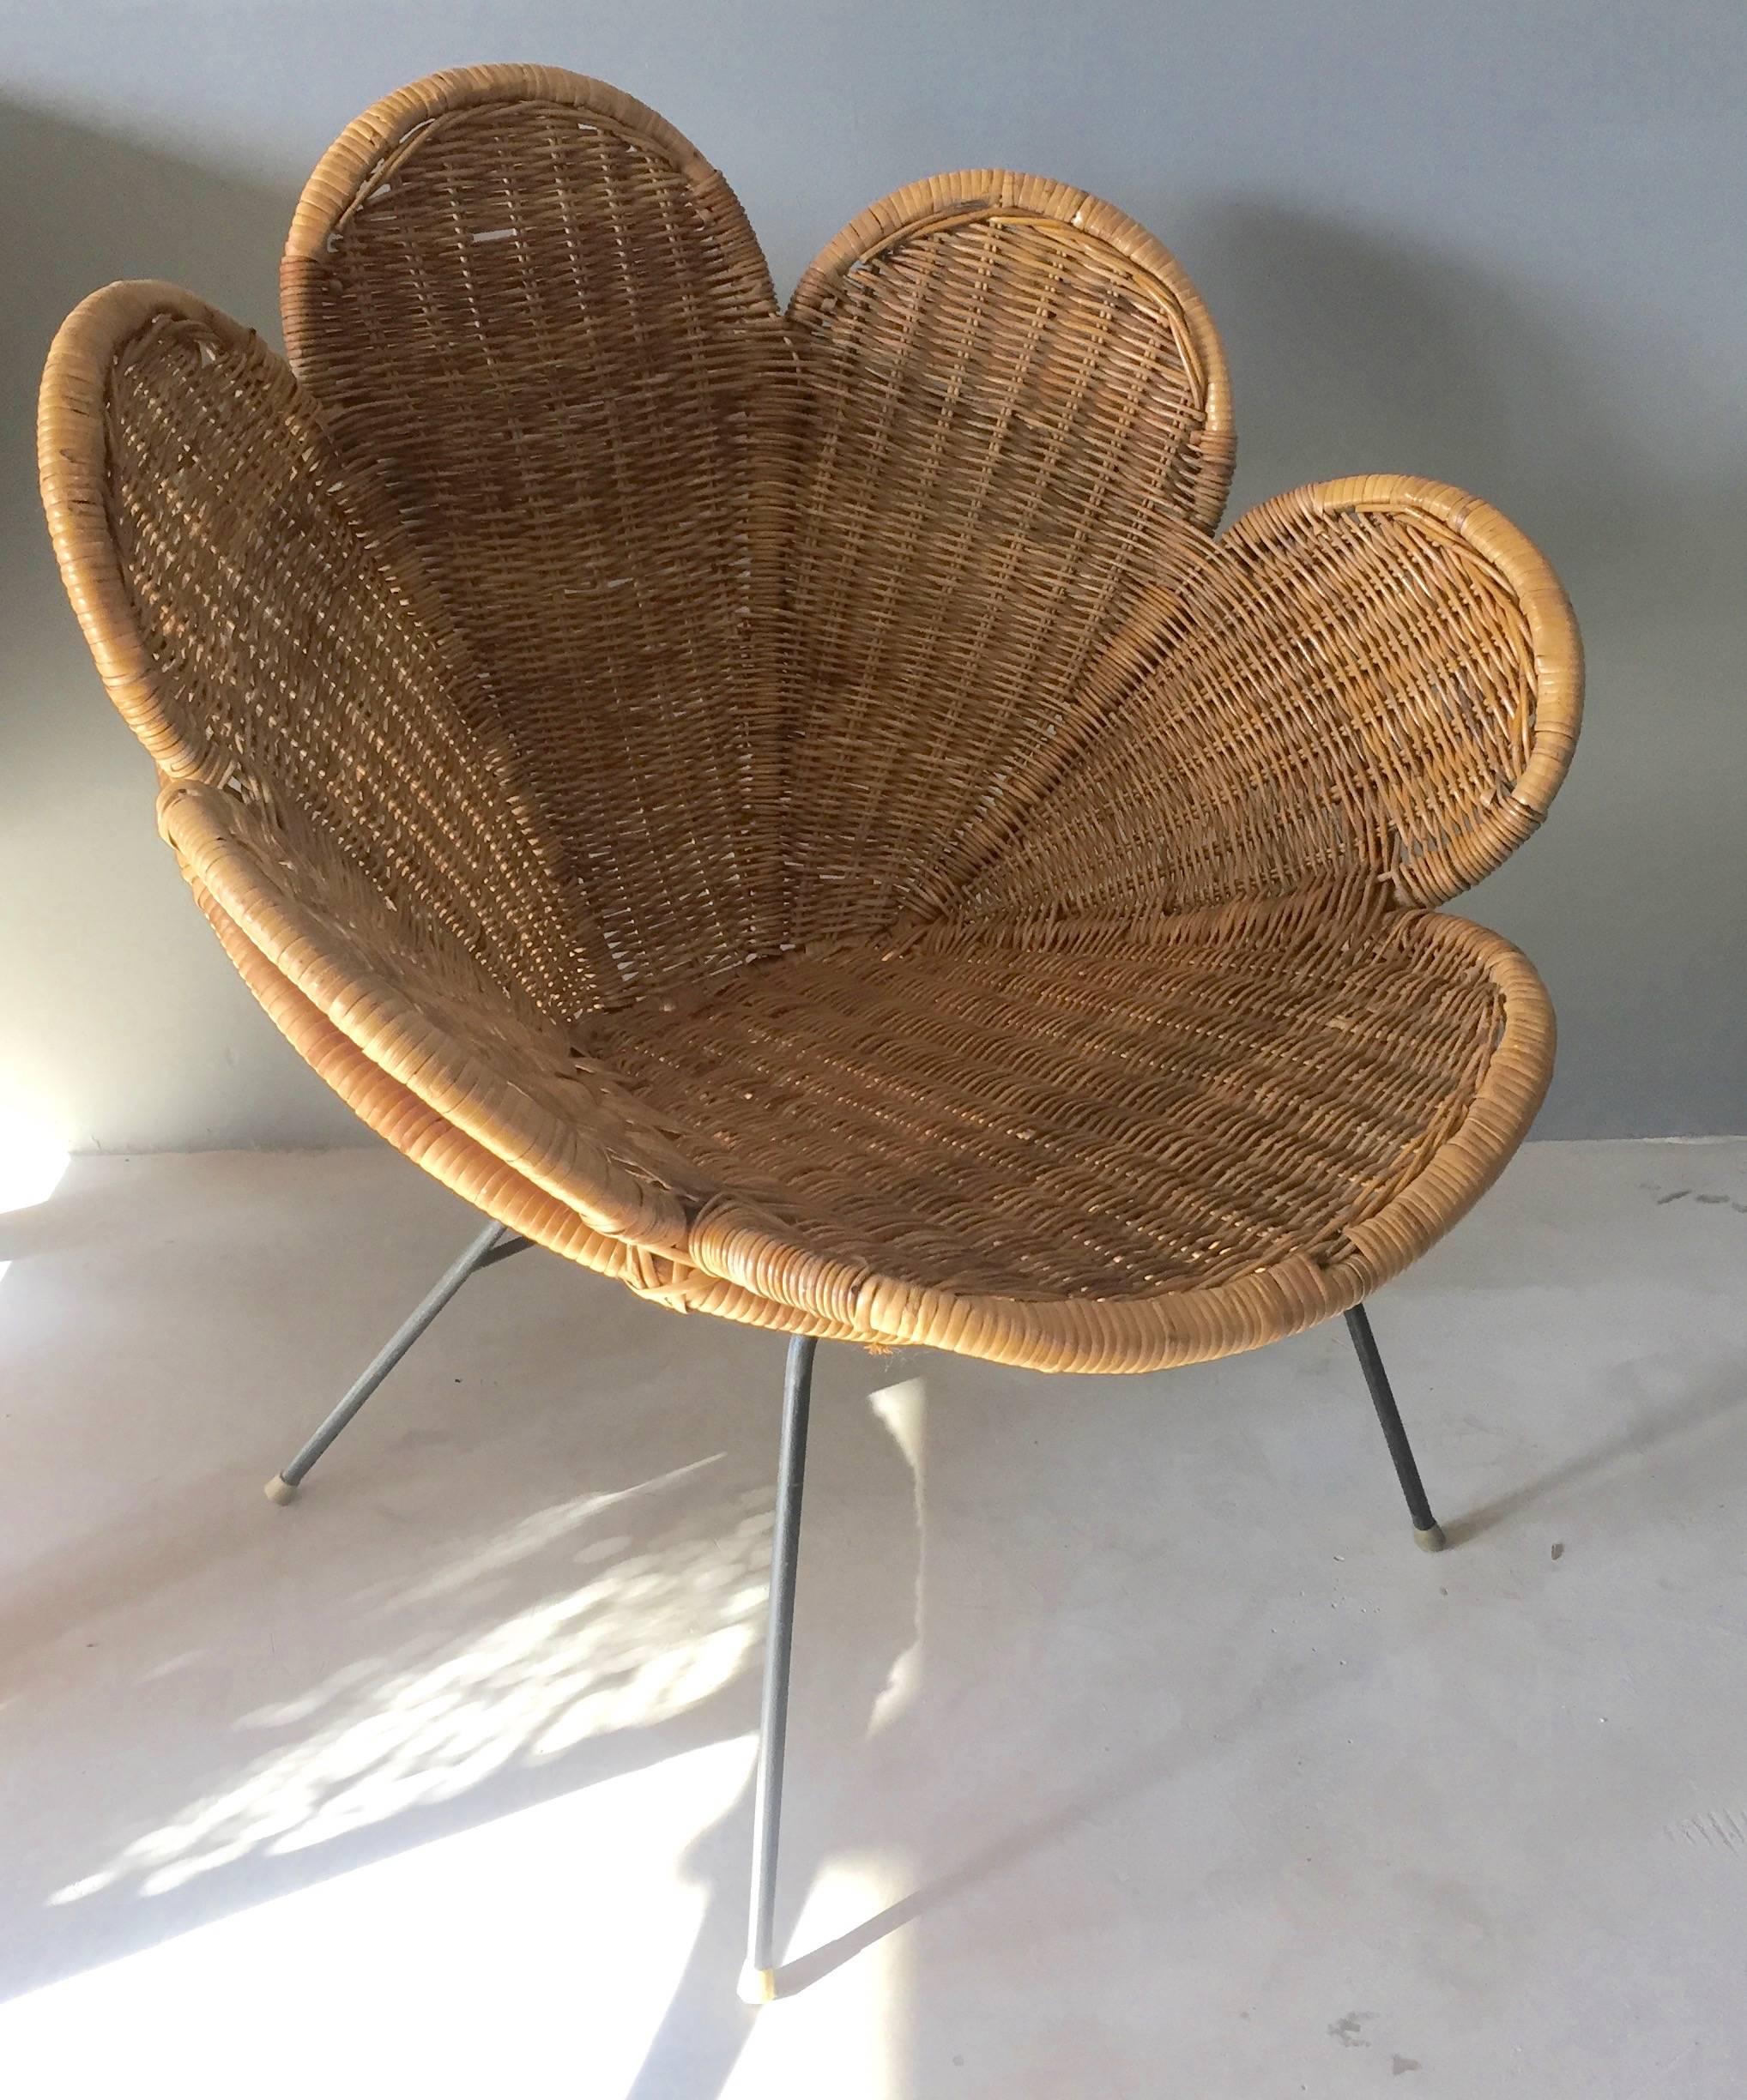 Stunning rattan and iron chair in the shape of a flower. Excellent vintage condition. Great standalone sculptural chair.